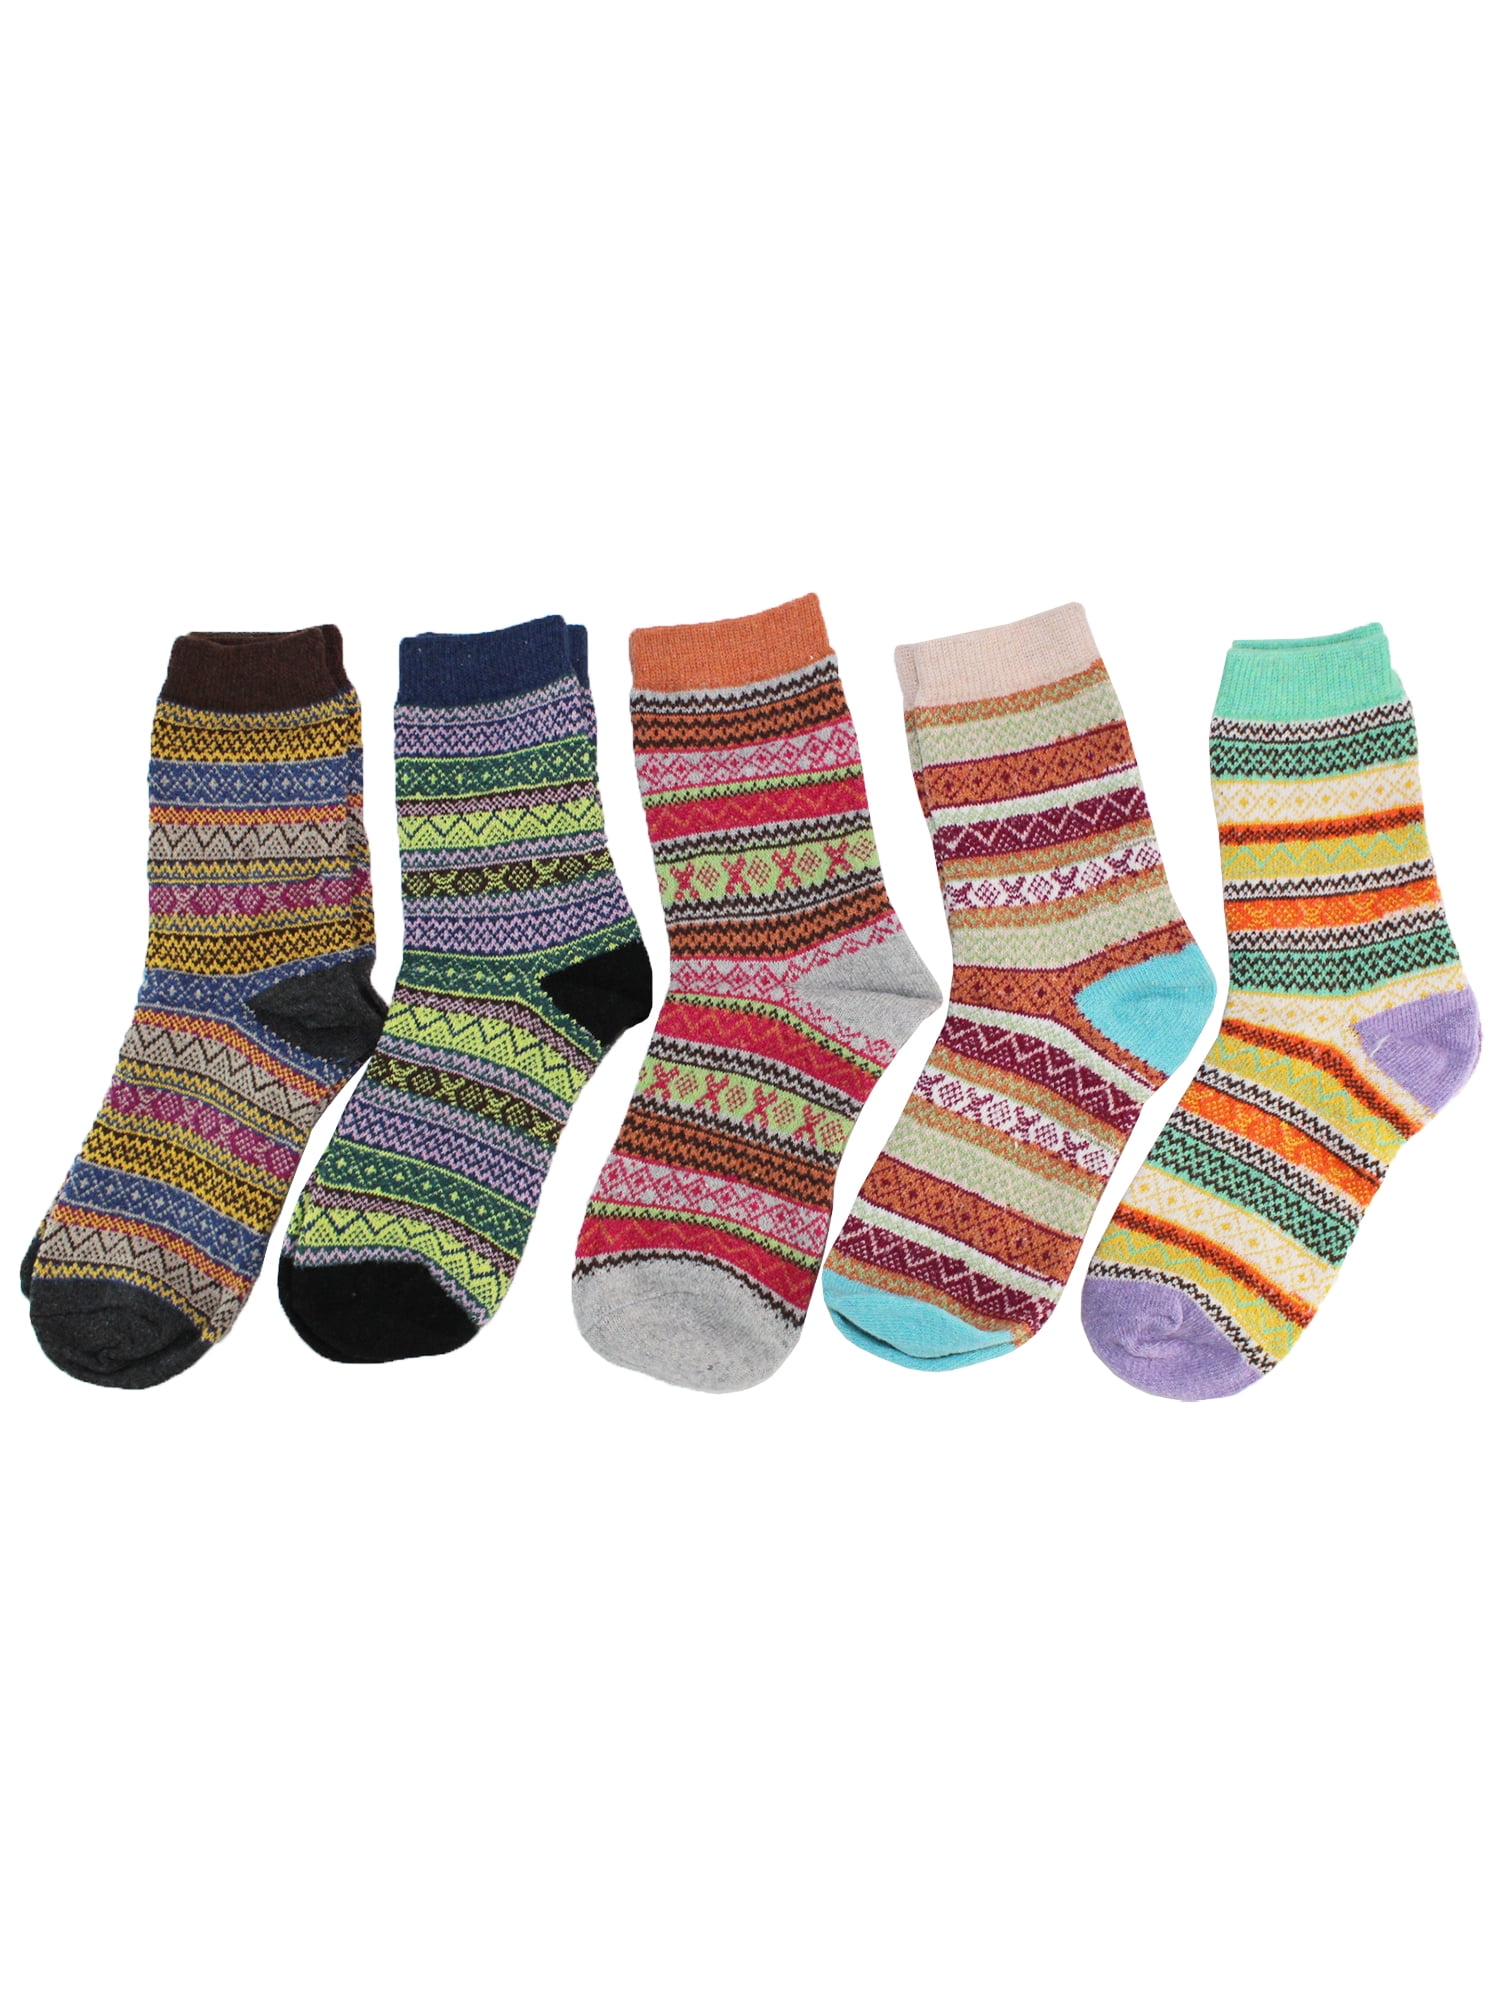 5 Pack Womens Merino Wool Comfortable Warm Soft Thick Casual Dress Solid Socks 